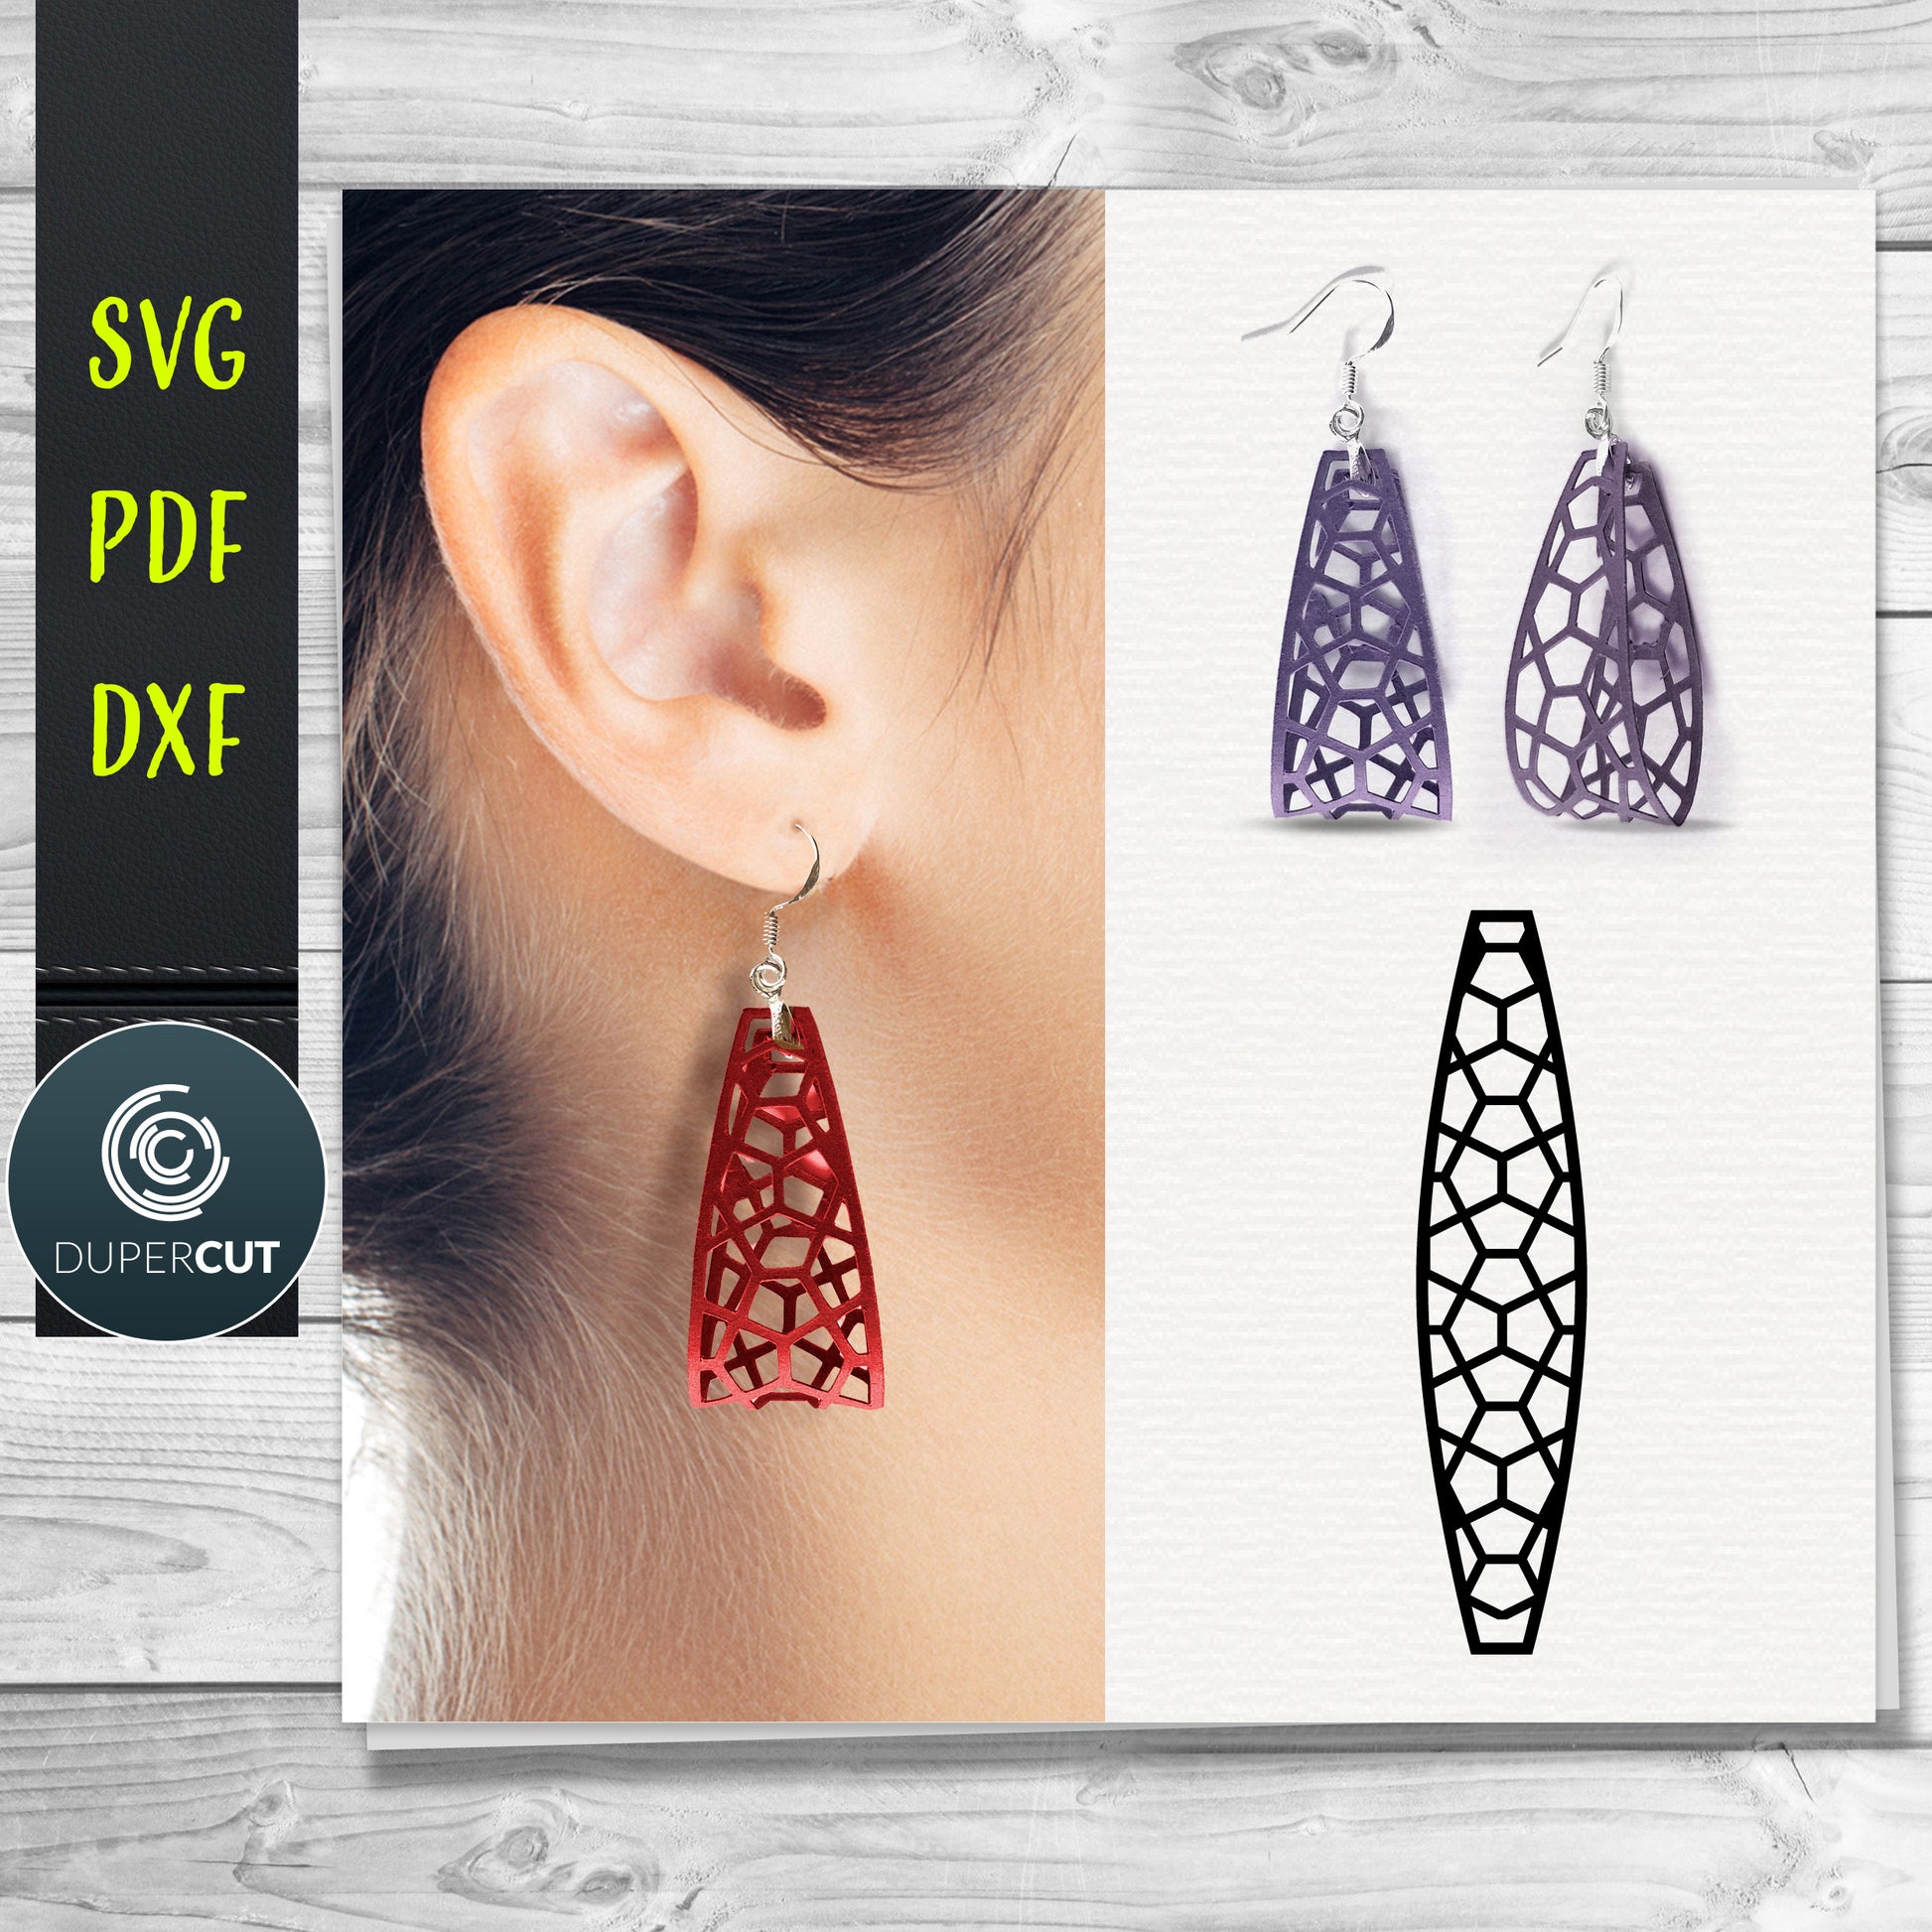 DIY 3D Sculpted Geometric Leather Earrings SVG PDF DXF vector files. Jewellery making template for laser and cutting machines - Glowforge, Cricut, Silhouette Cameo.